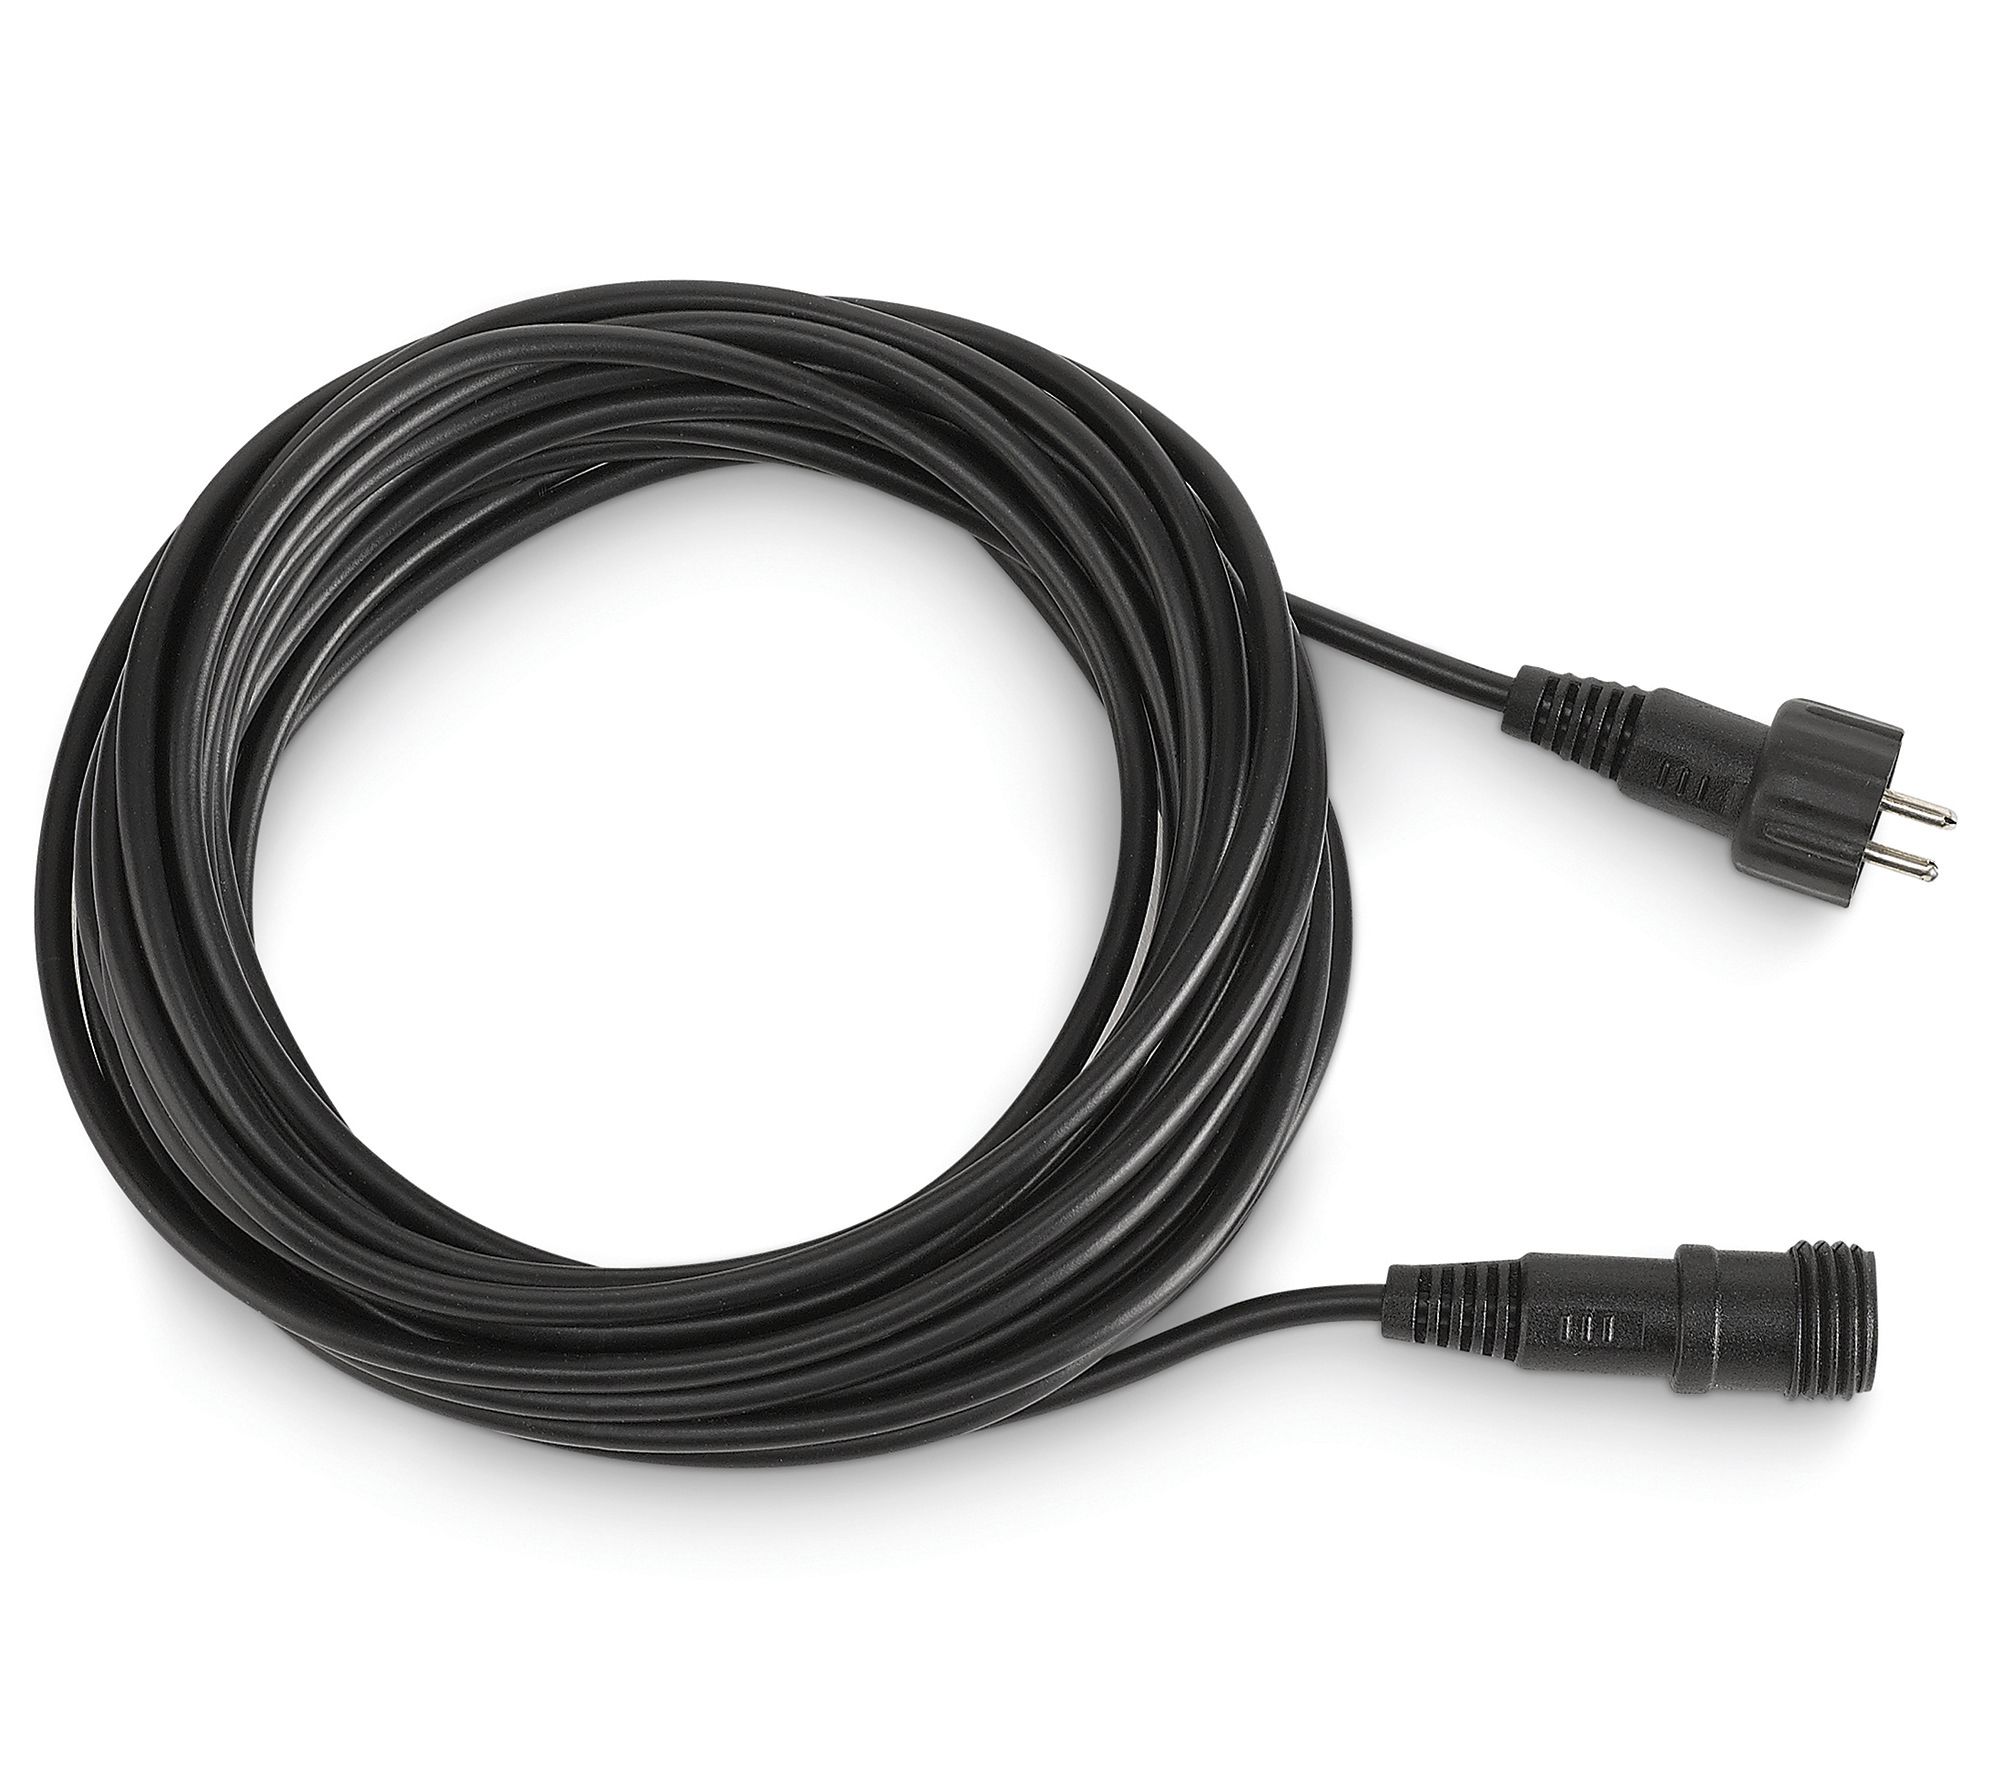 Philips Hue Outdoor 5-Meter Cable Extension - QVC.com